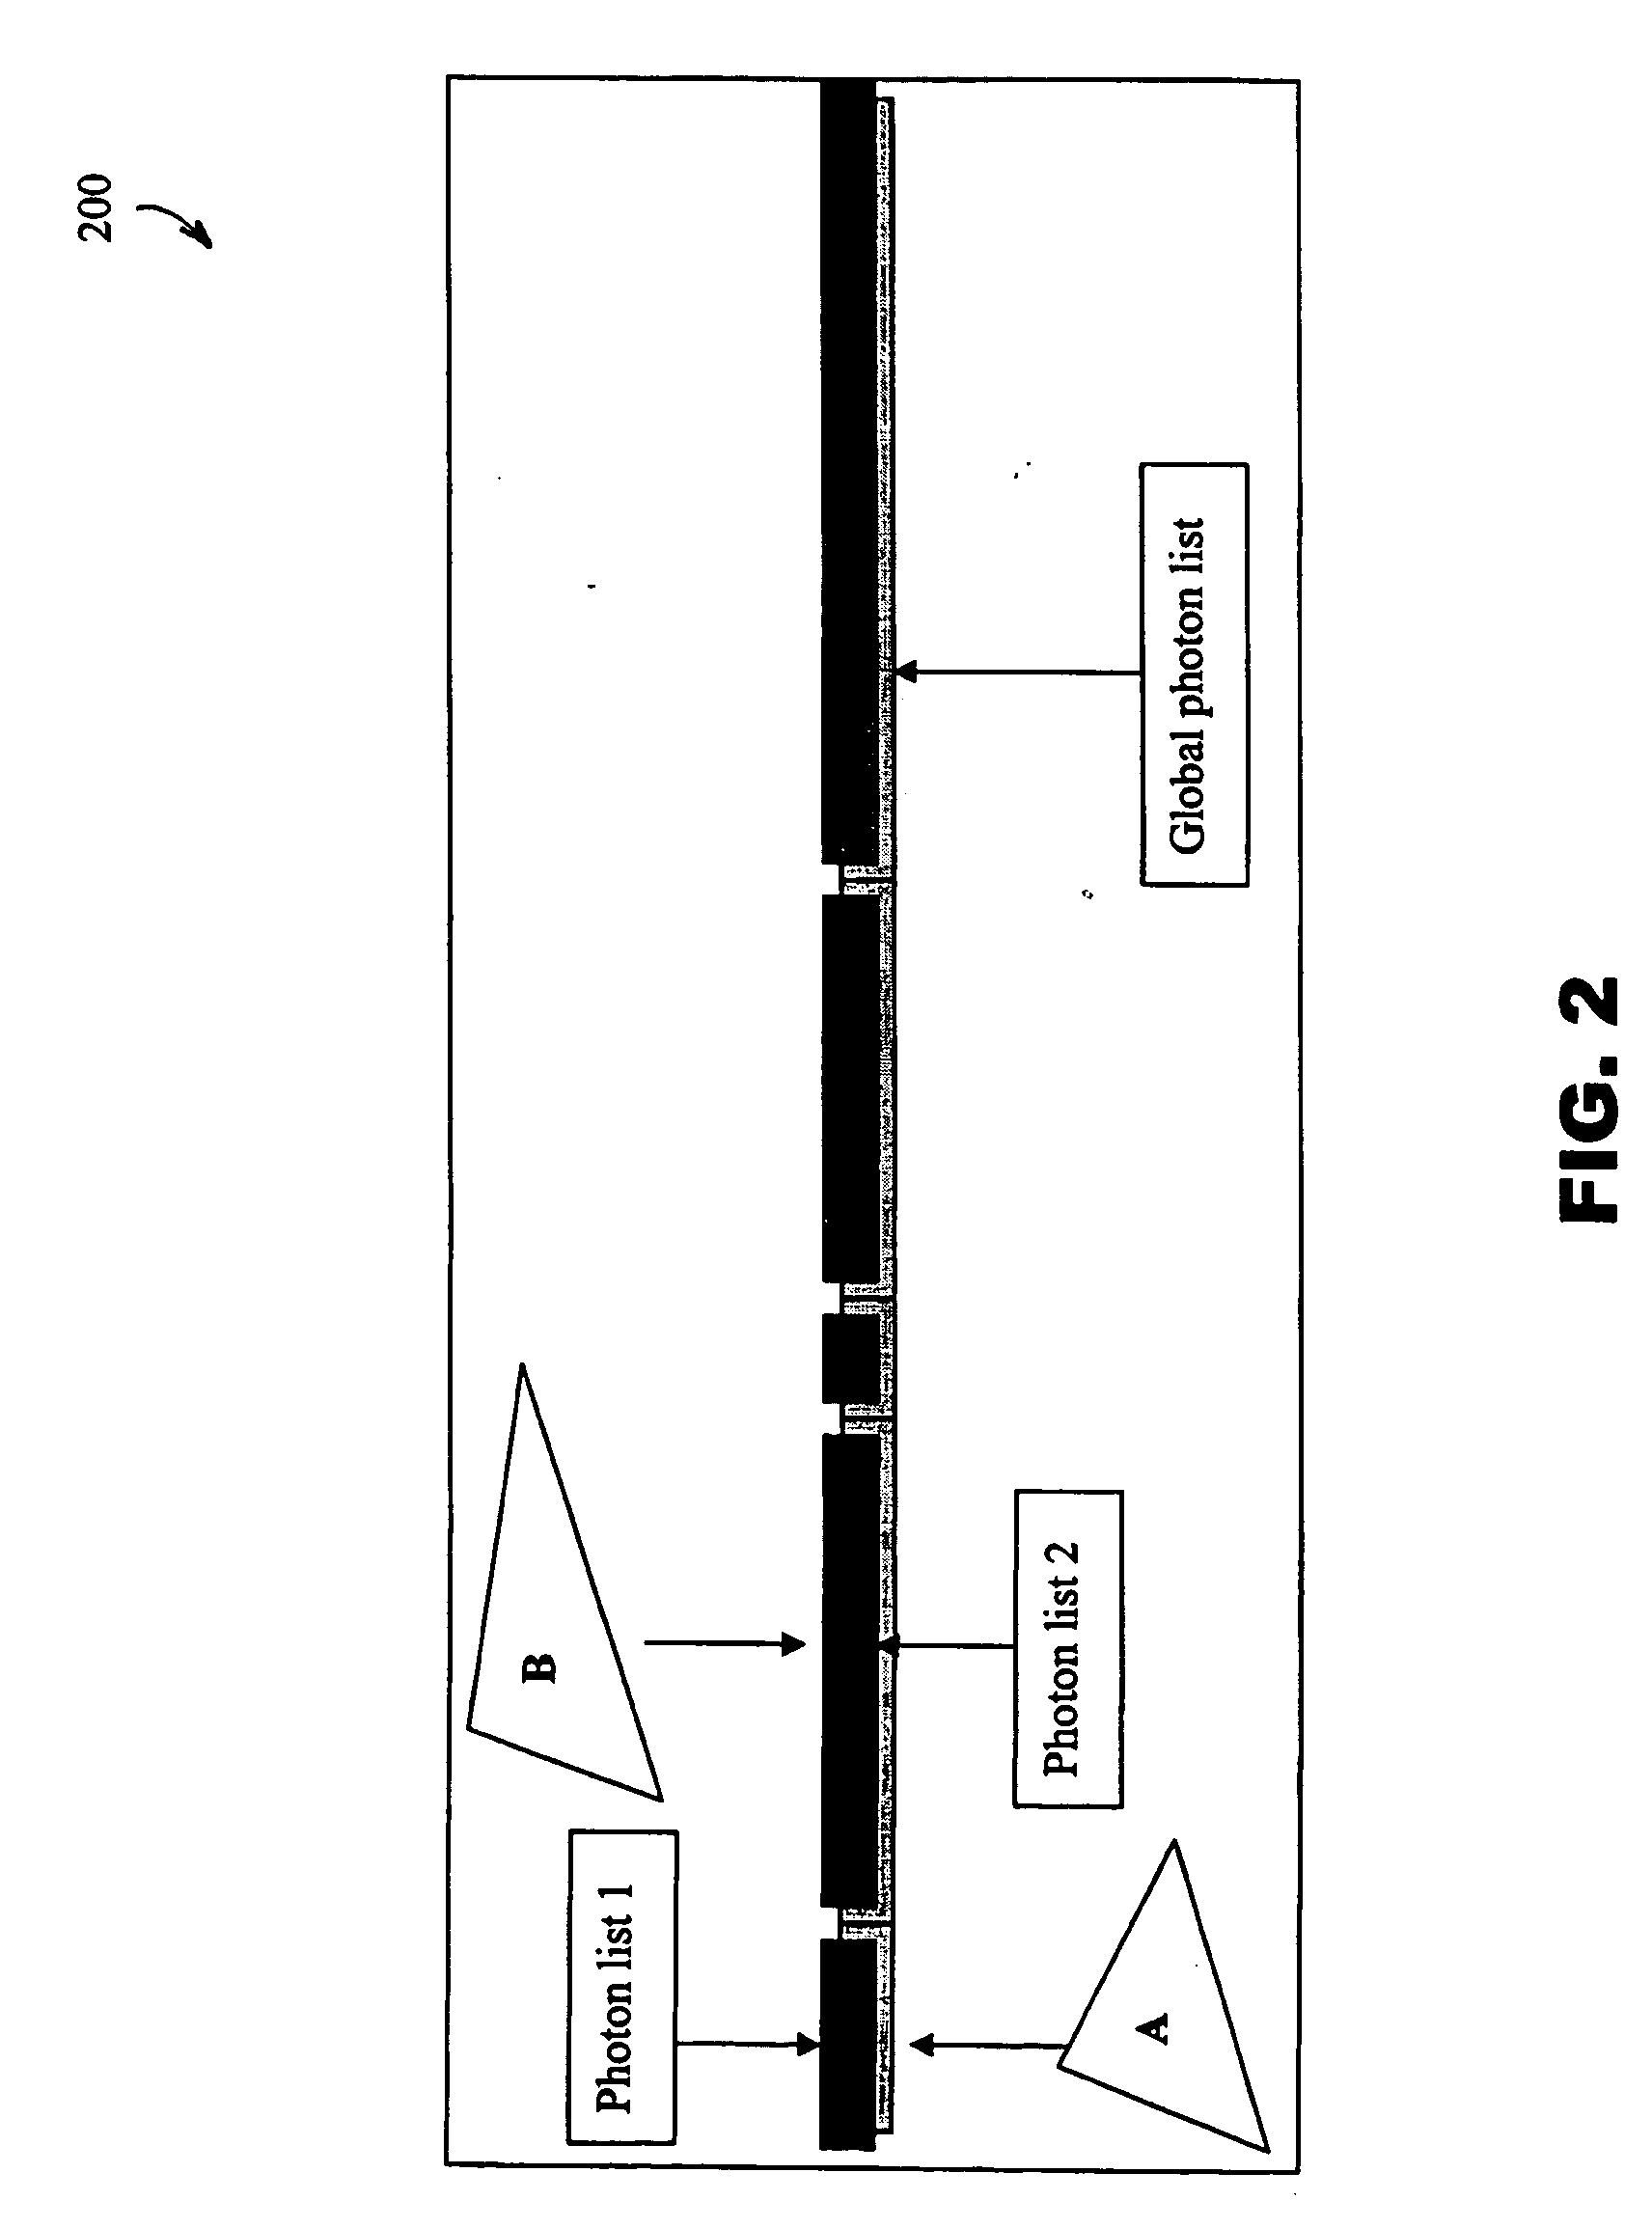 Diffuse photon map decomposition for parallelization of global illumination algorithm